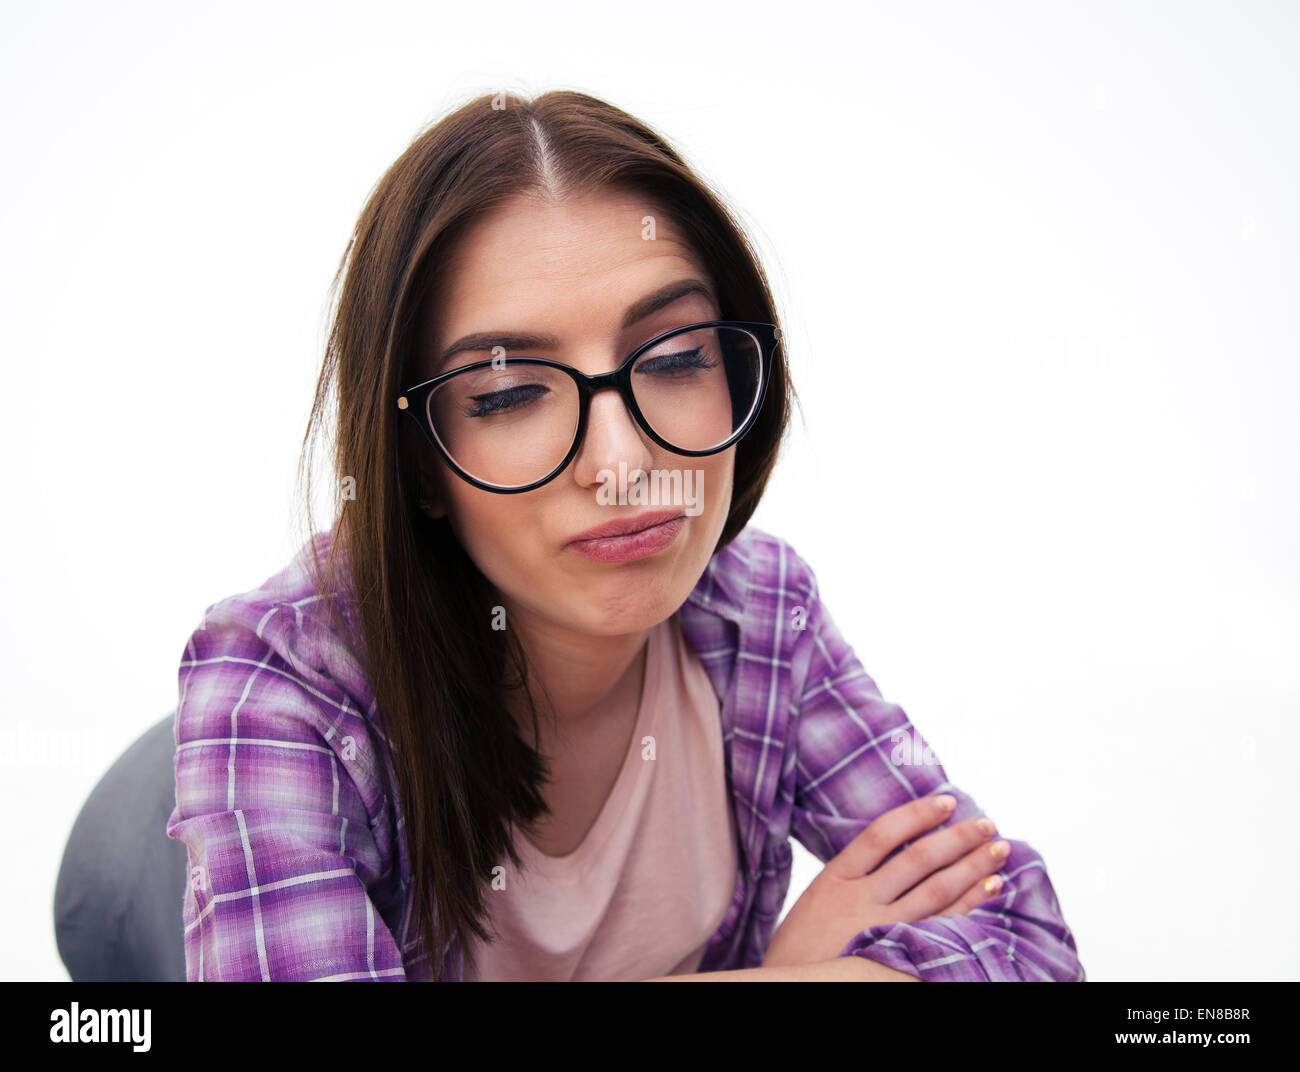 Young woman in glasses making funny face over white background Stock Photo